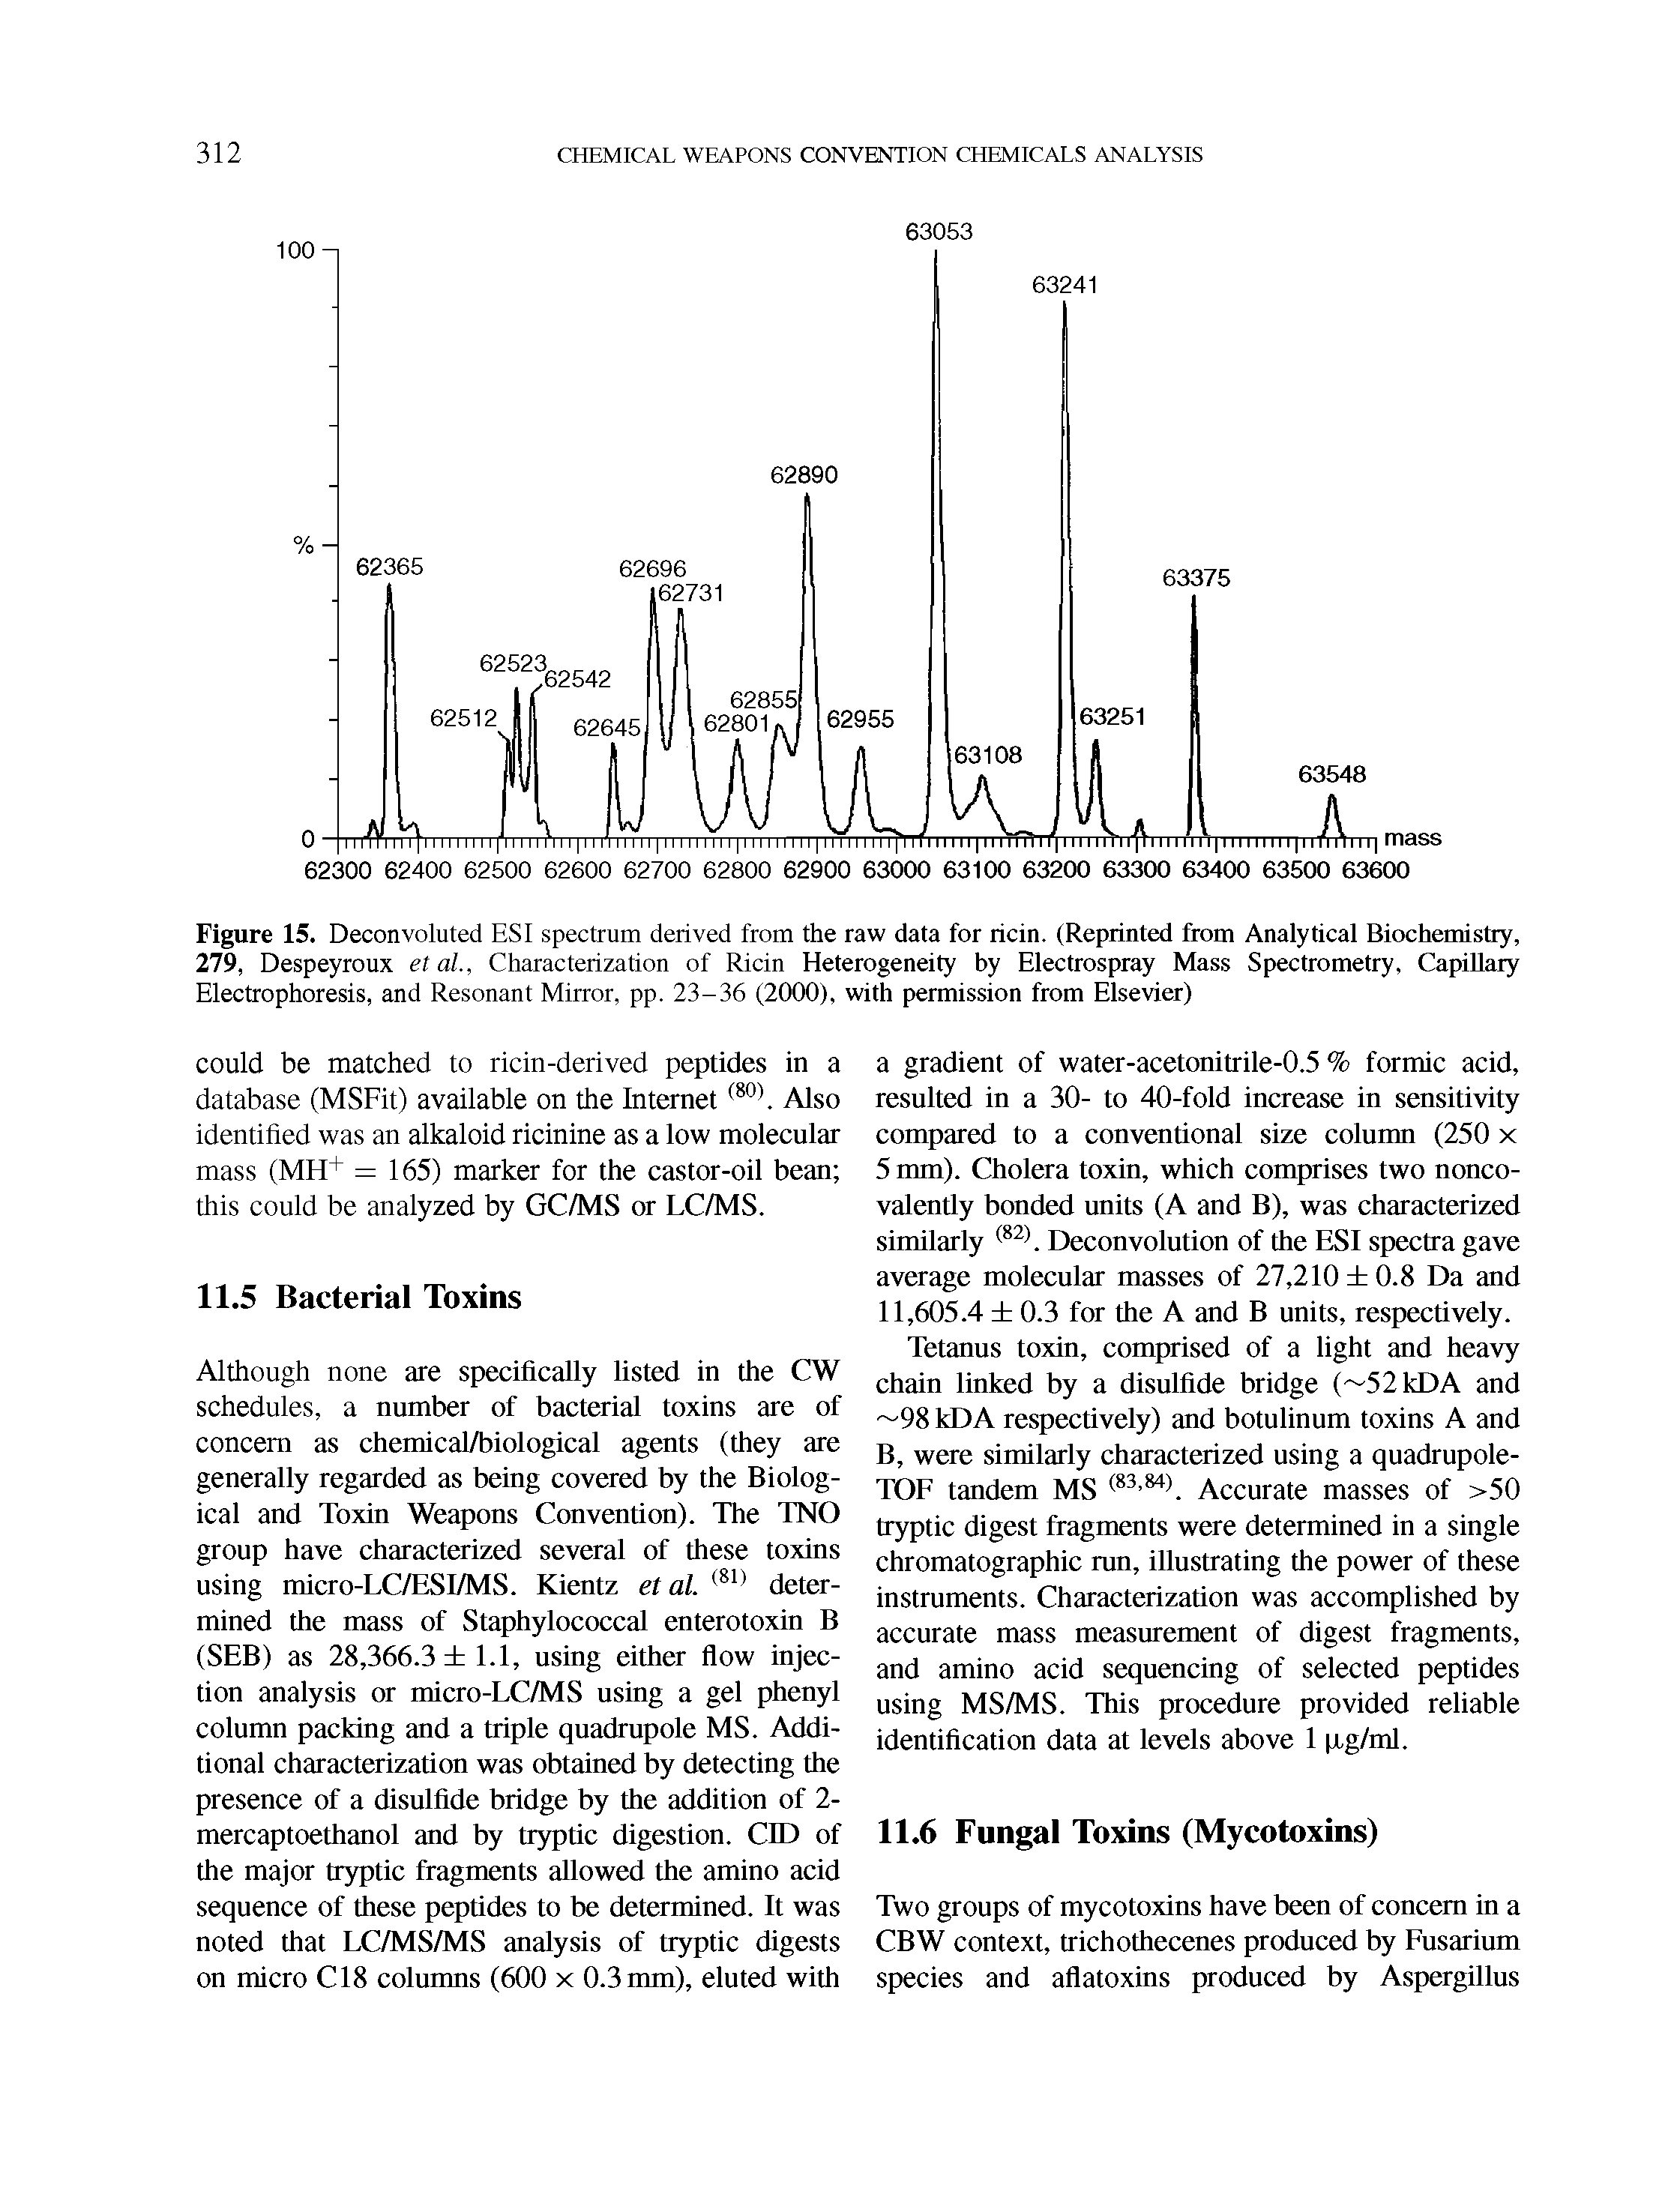 Figure 15. Deconvoluted ESI spectrum derived from the raw data for ricin. (Reprinted from Analytical Biochemistry, 279, Despeyroux etal., Characterization of Ricin Heterogeneity by Electrospray Mass Spectrometry, Capillary Electrophoresis, and Resonant Mirror, pp. 23-36 (2000), with permission from Elsevier)...